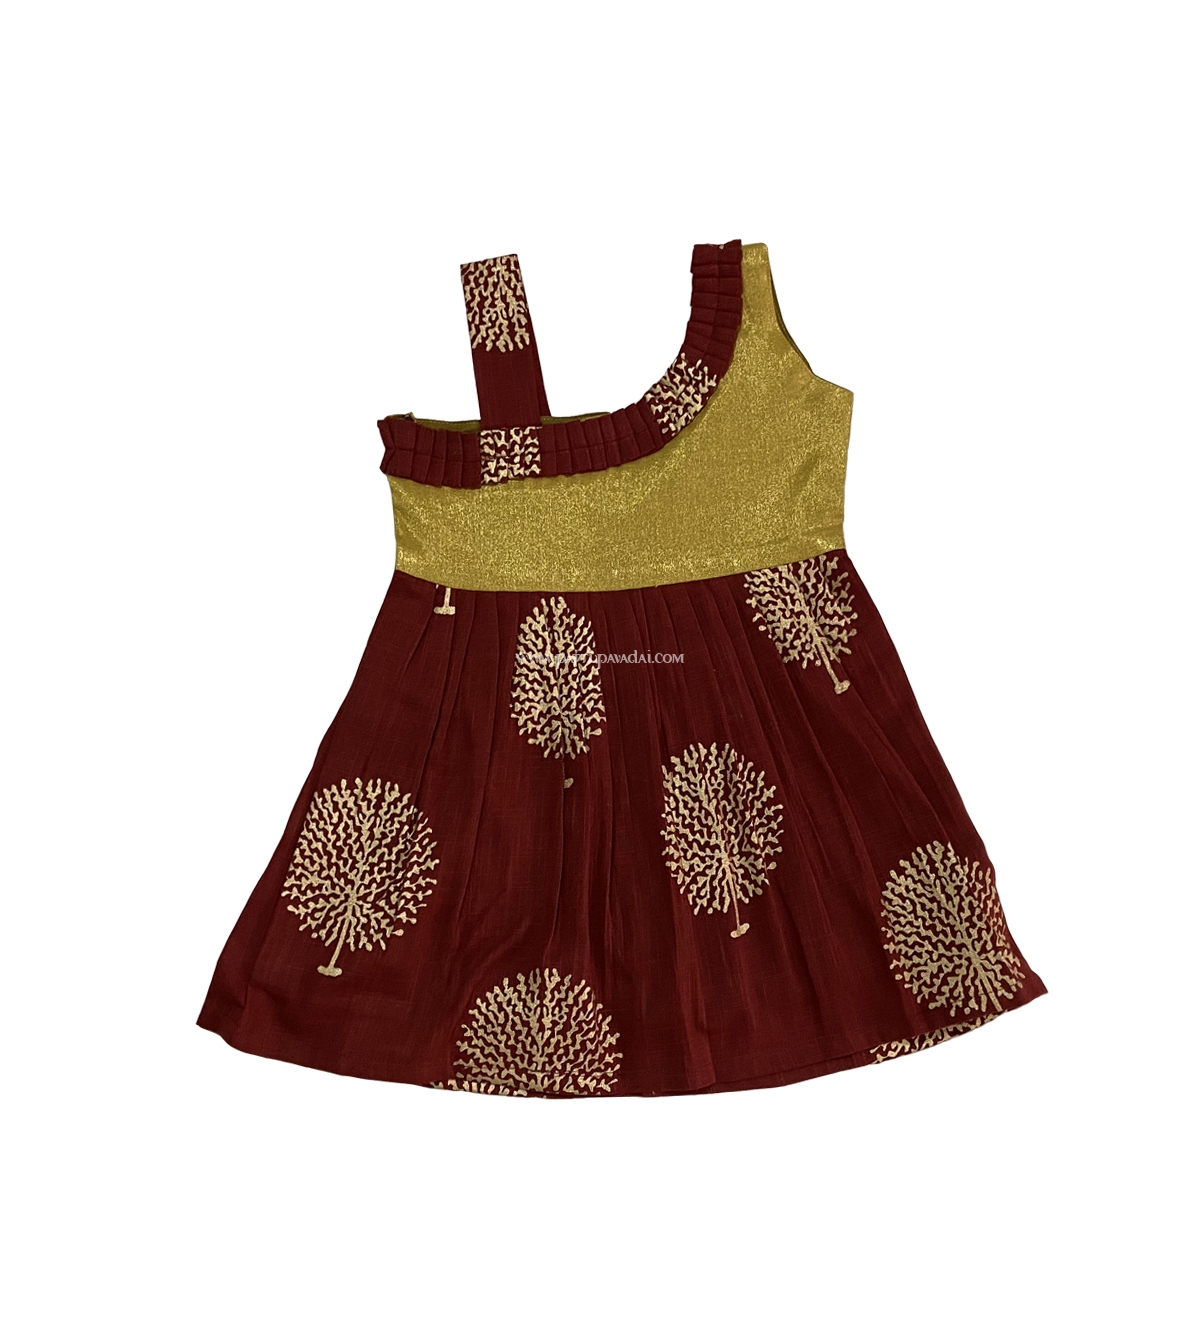 Shop Online Cute Cotton Frock Maroon and Golden